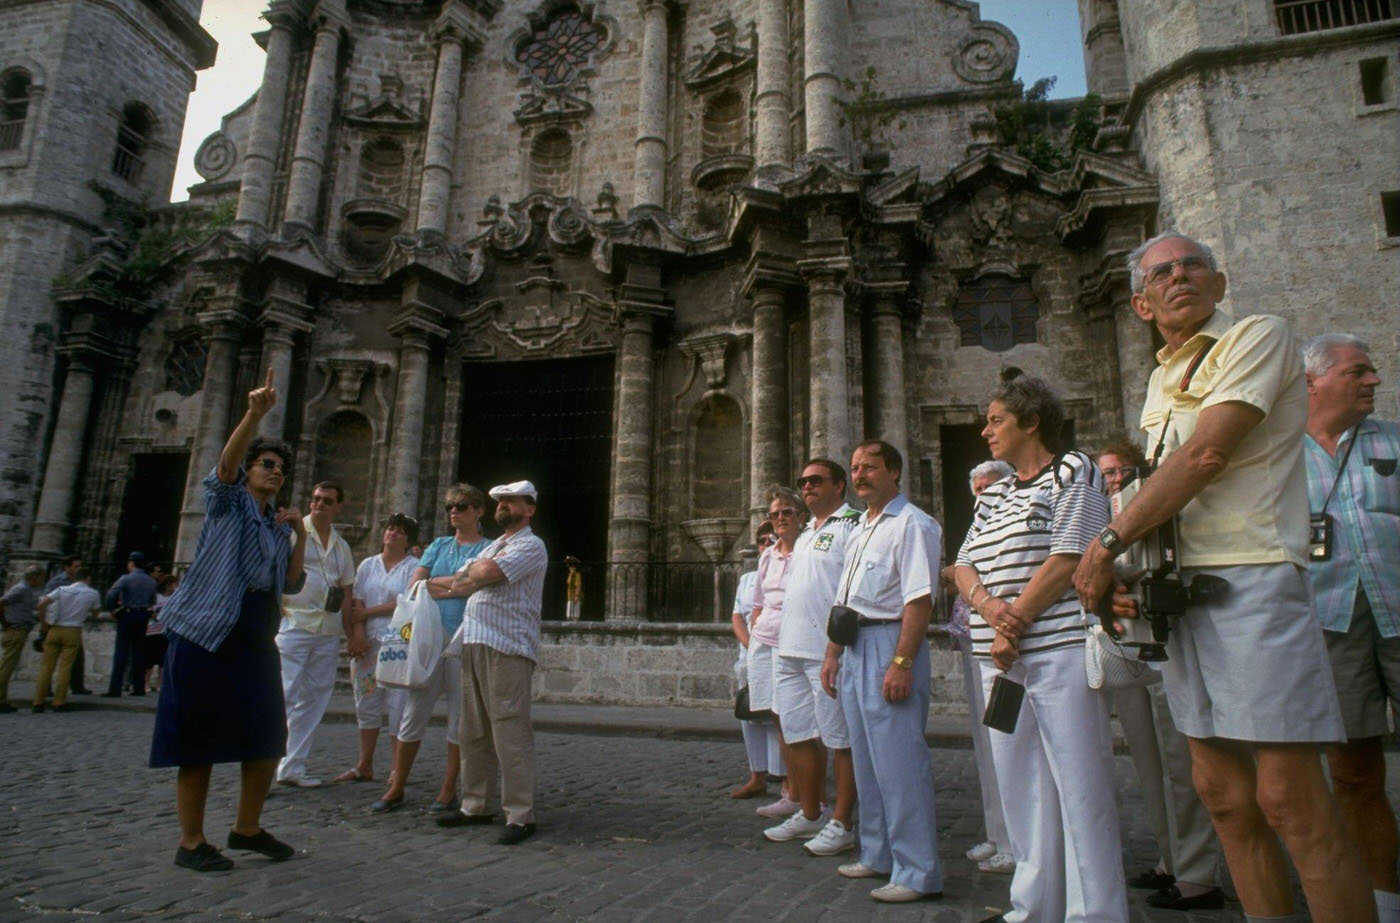 Camera-toting tour group seeing sights in the colonial section of Old Havana.